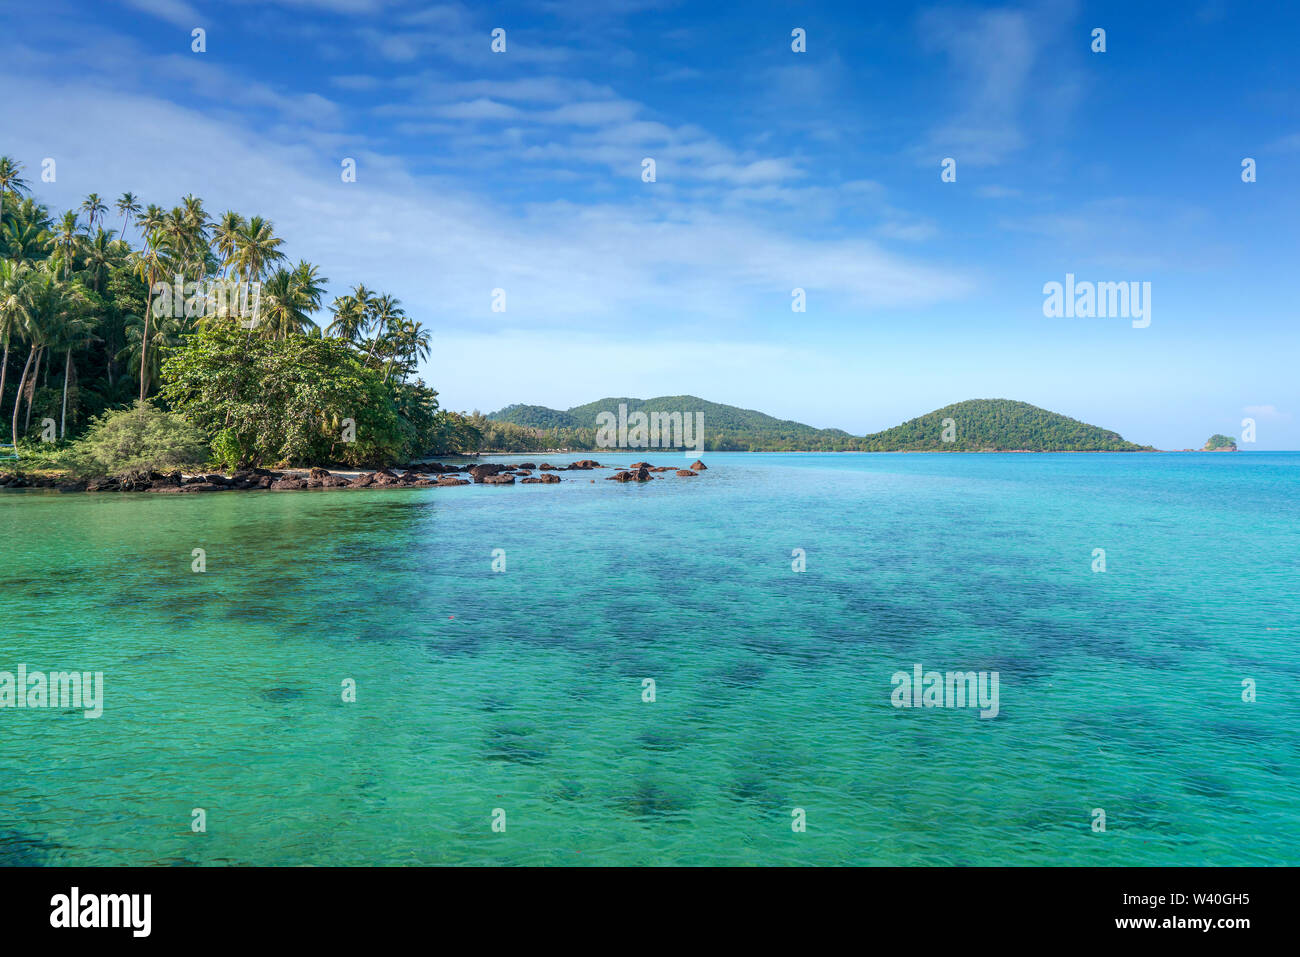 Exotic tropical beach landscape for background or wallpaper. Design of tourism for summer vacation travel holiday destination concept. Stock Photo